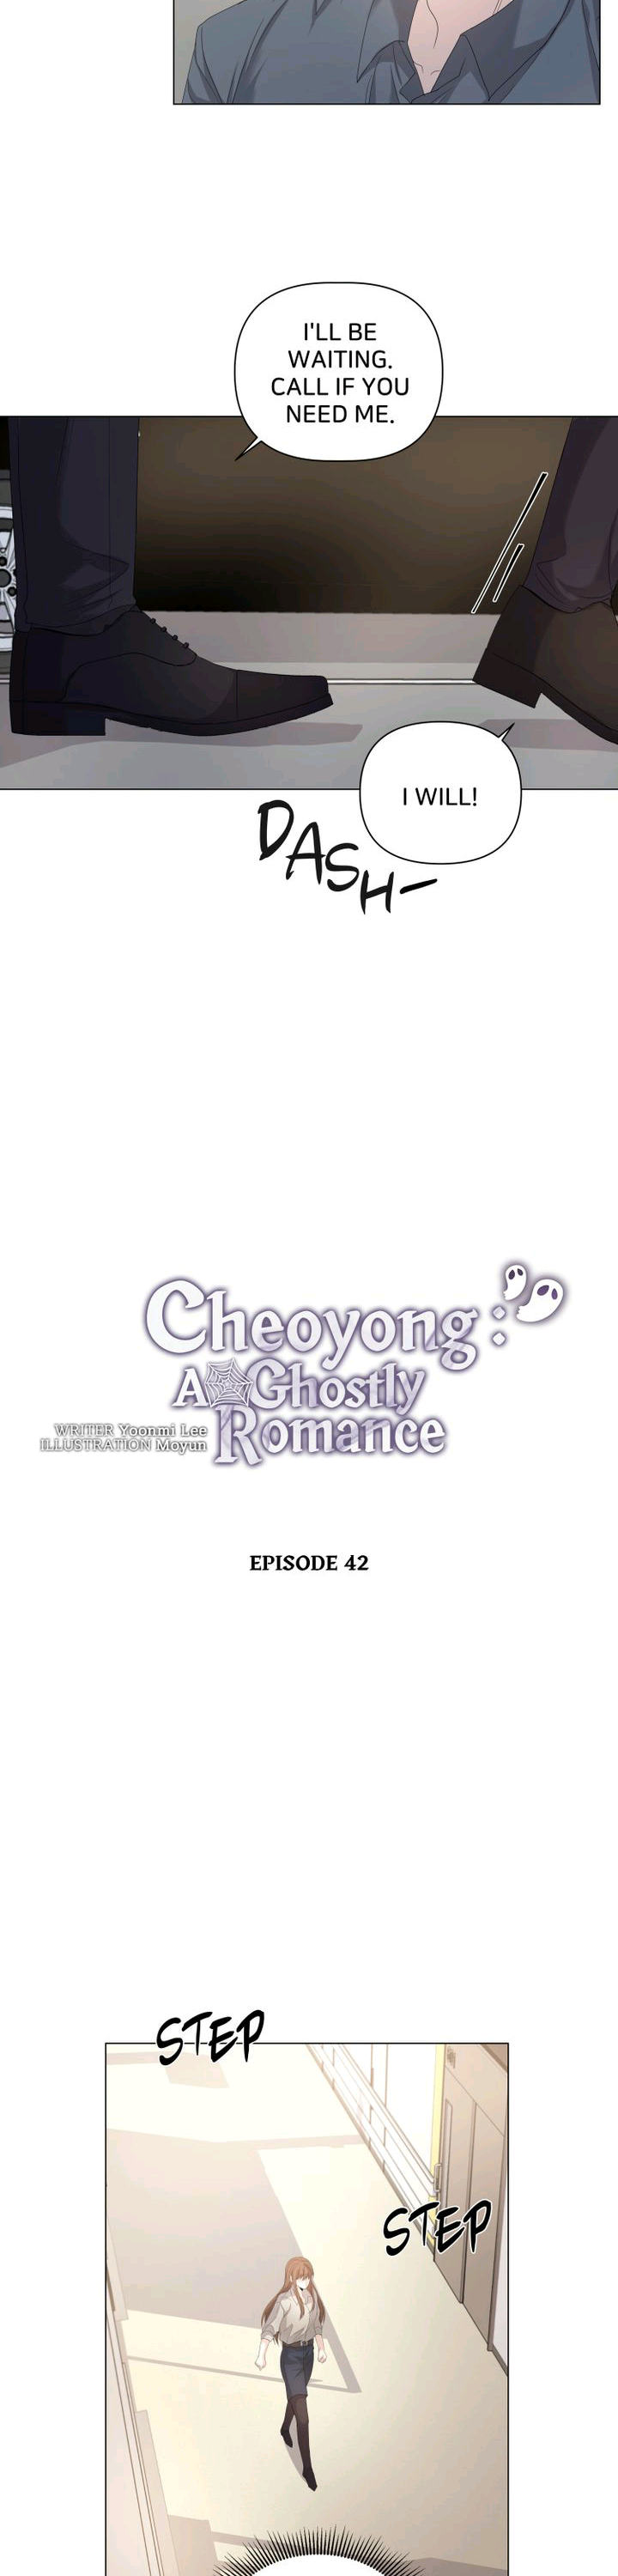 Horror Romance: Cheoyong - Page 3